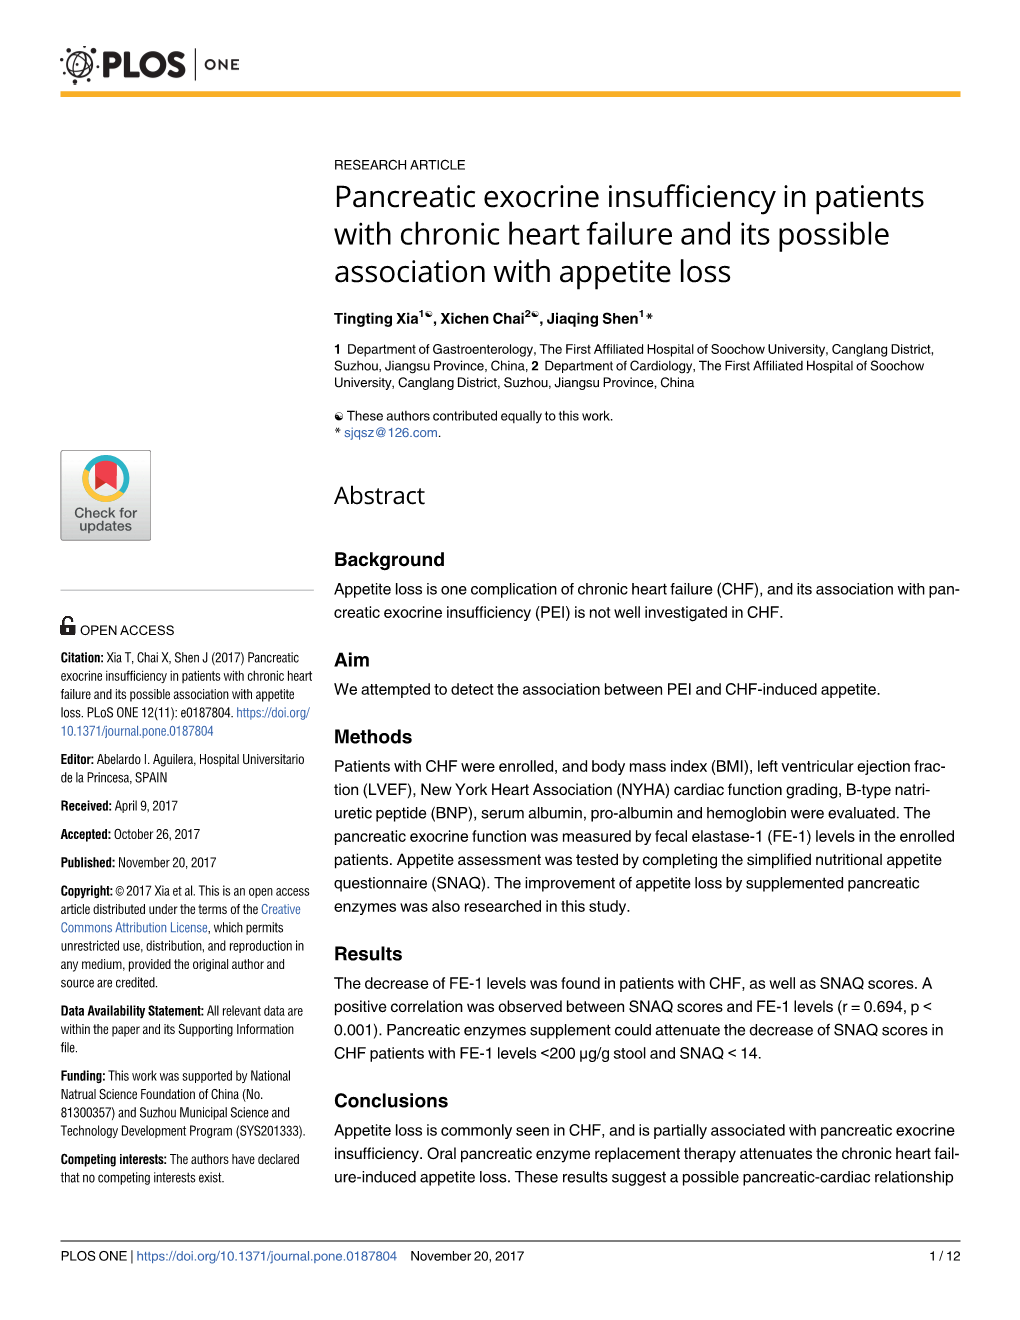 Pancreatic Exocrine Insufficiency in Patients with Chronic Heart Failure and Its Possible Association with Appetite Loss